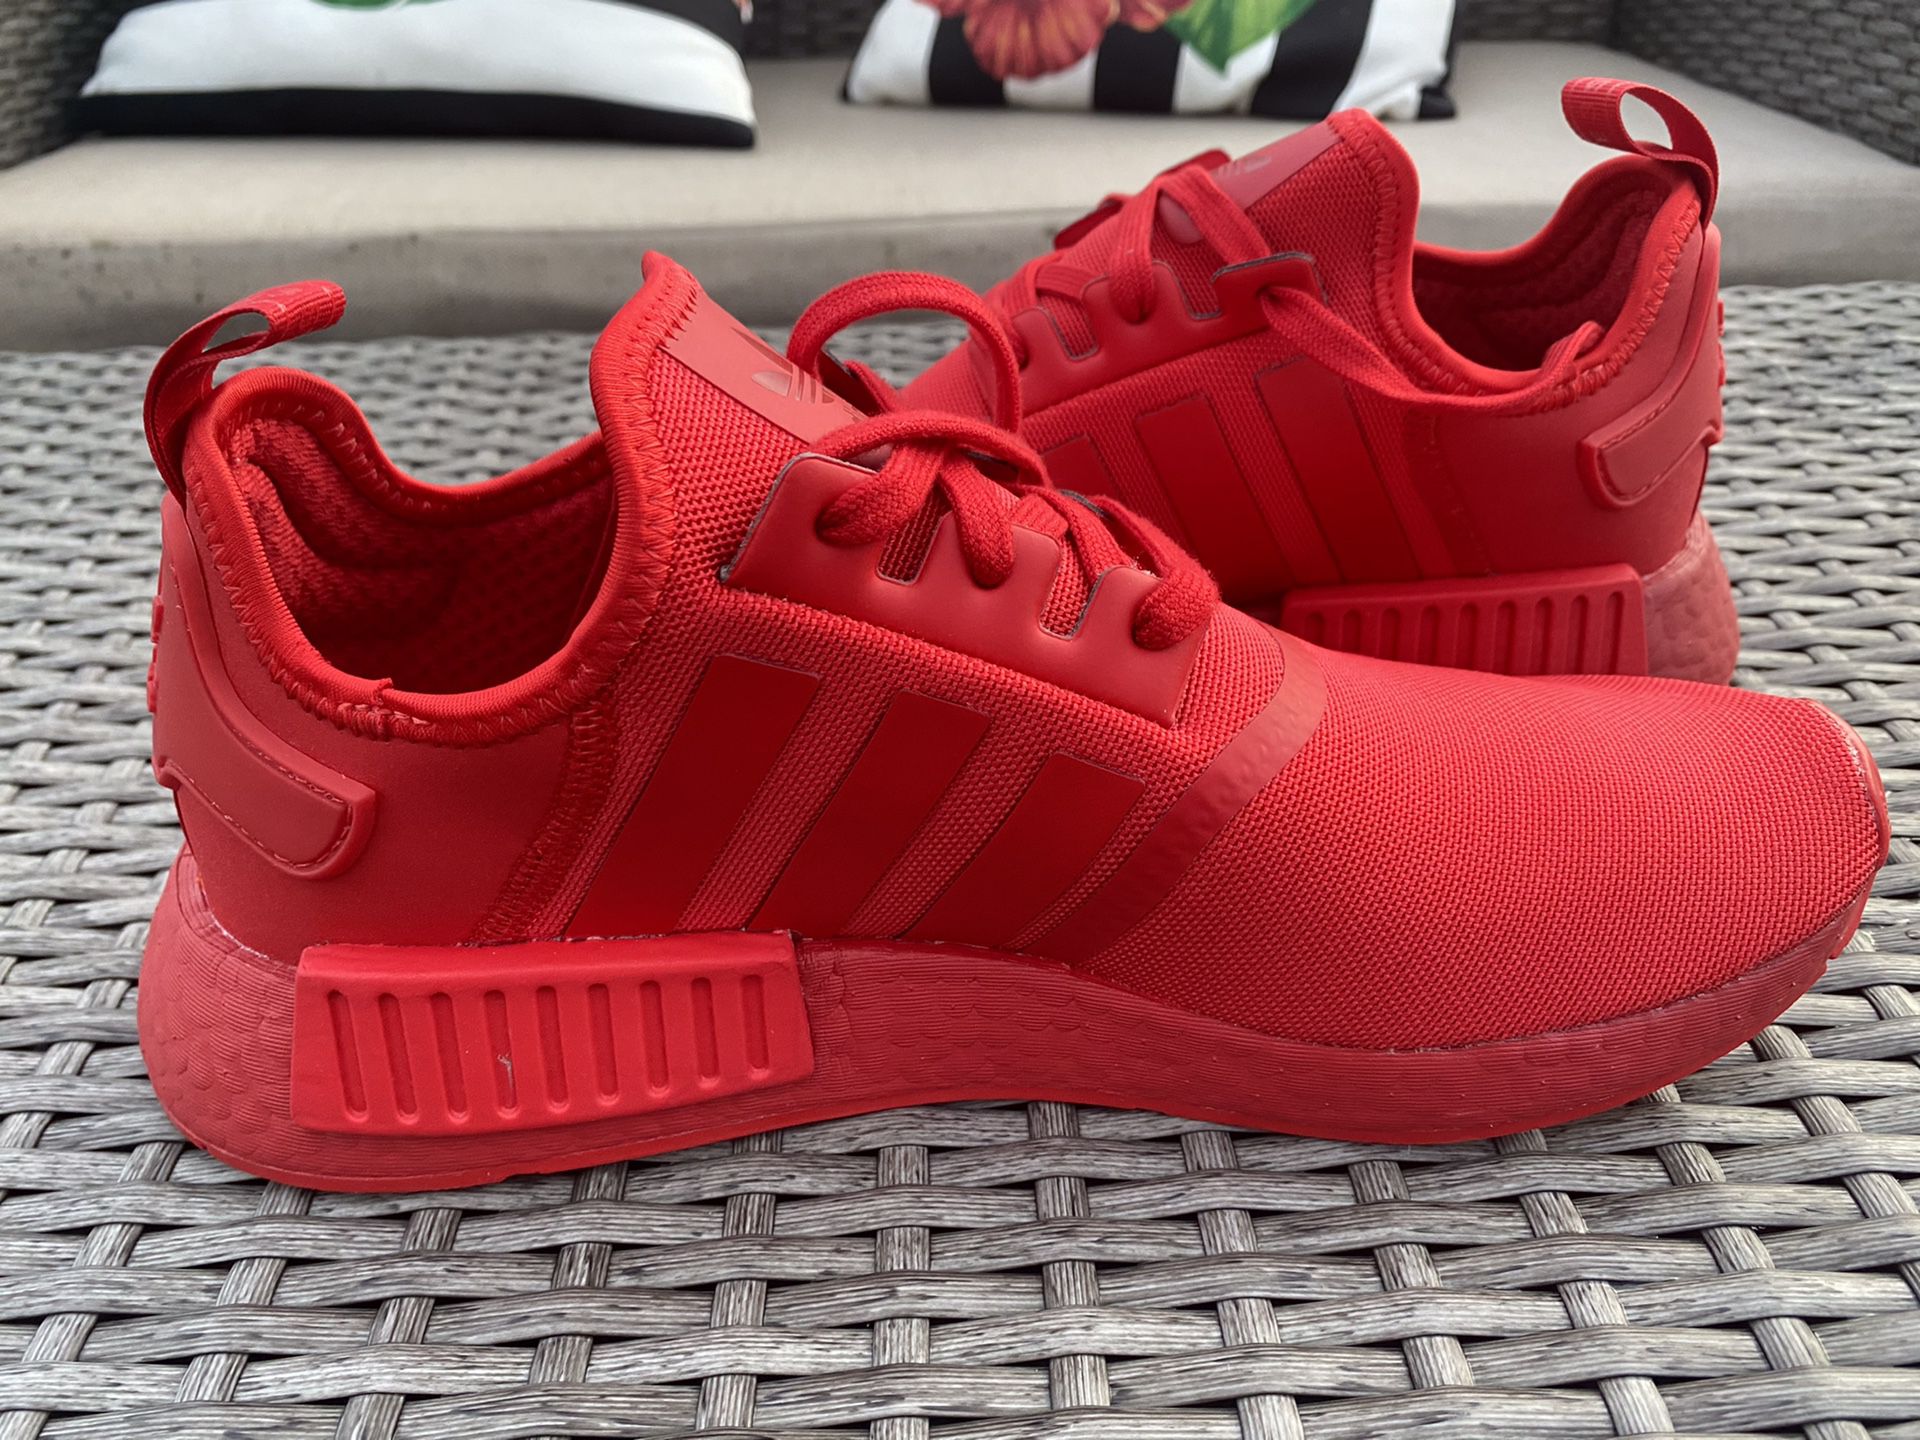 Adidas NMD R1 red sneakers size 9 men’s